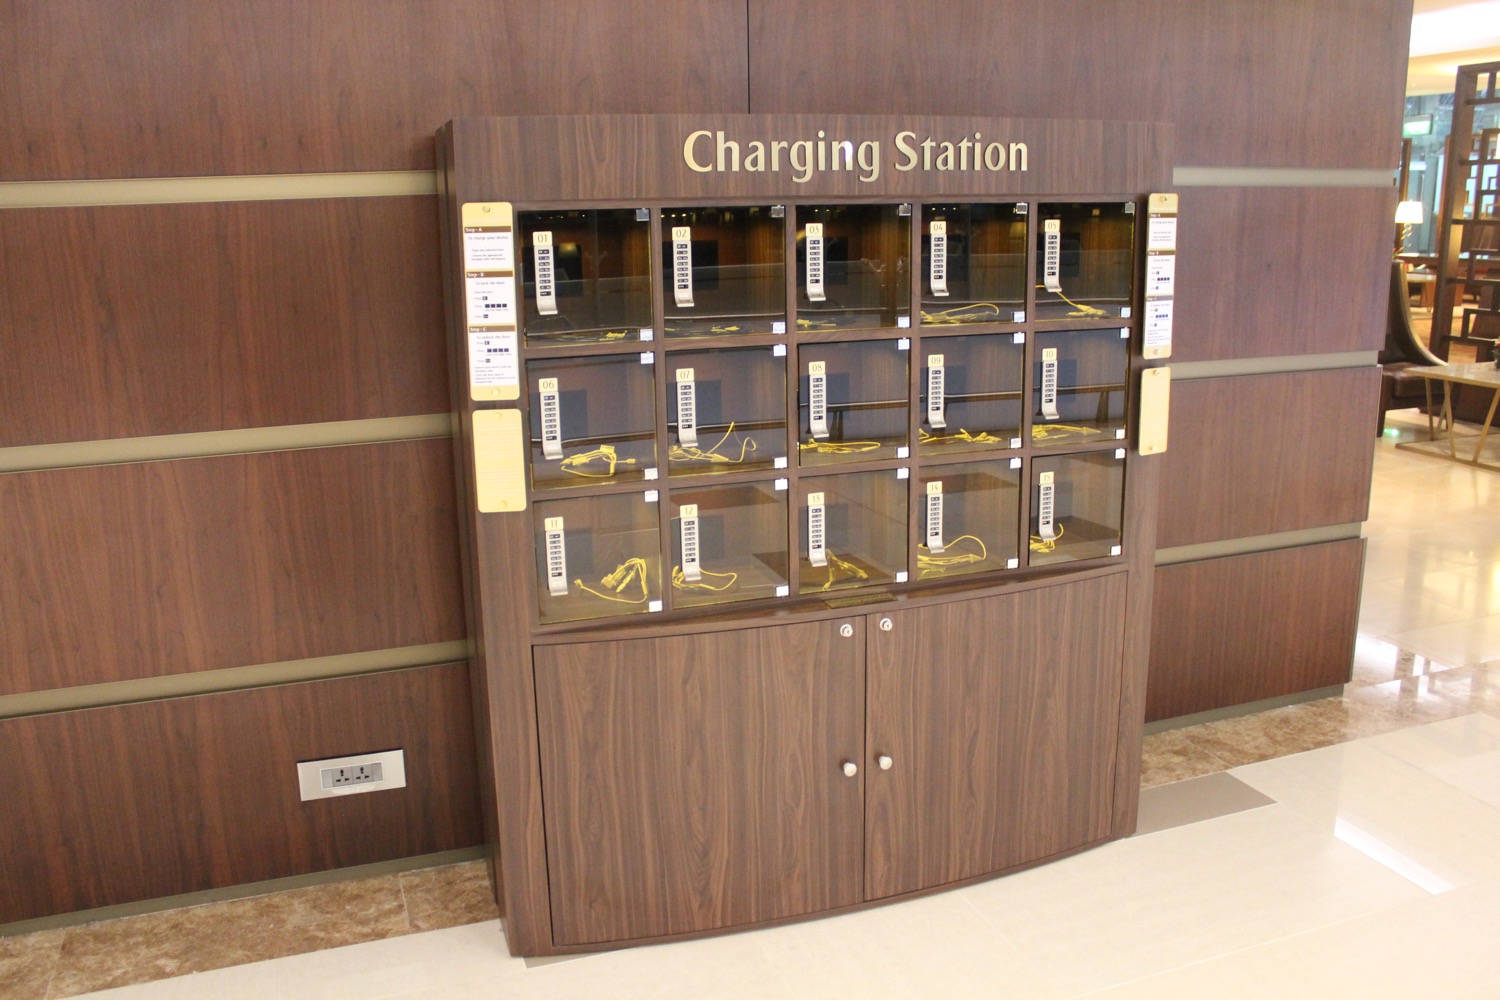 a charging station with many charging cords